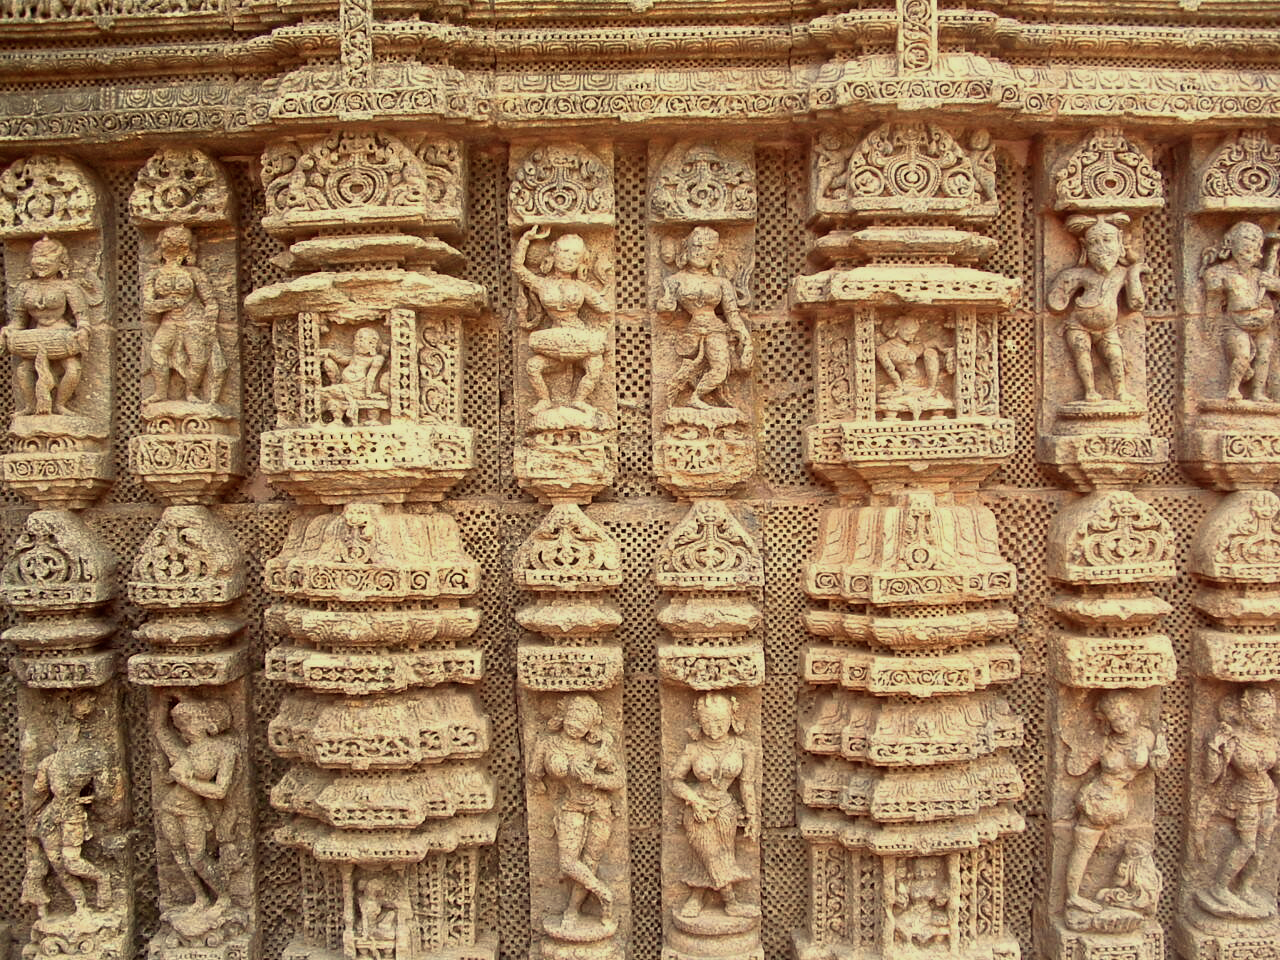 The image “http://upload.wikimedia.org/wikipedia/commons/e/ee/Stone_work_at_Konark_Orissa_India.jpg” cannot be displayed, because it contains errors.